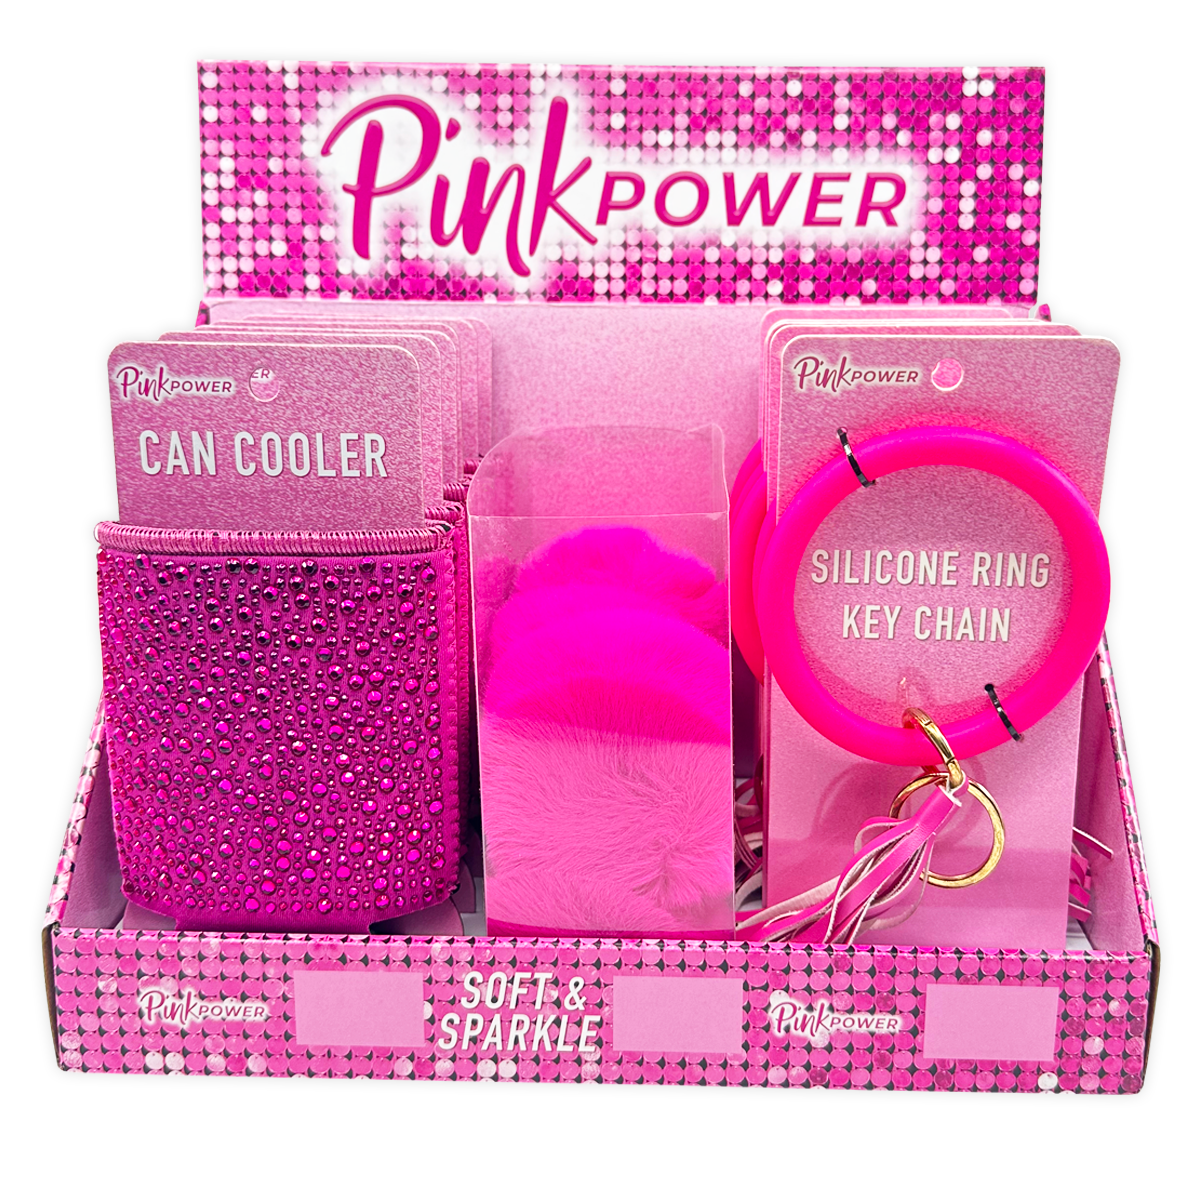 ITEM NUMBER 088528 Pink Power Key Chain & Can Cooler Assortment 18 PIECES PER DISPLAY